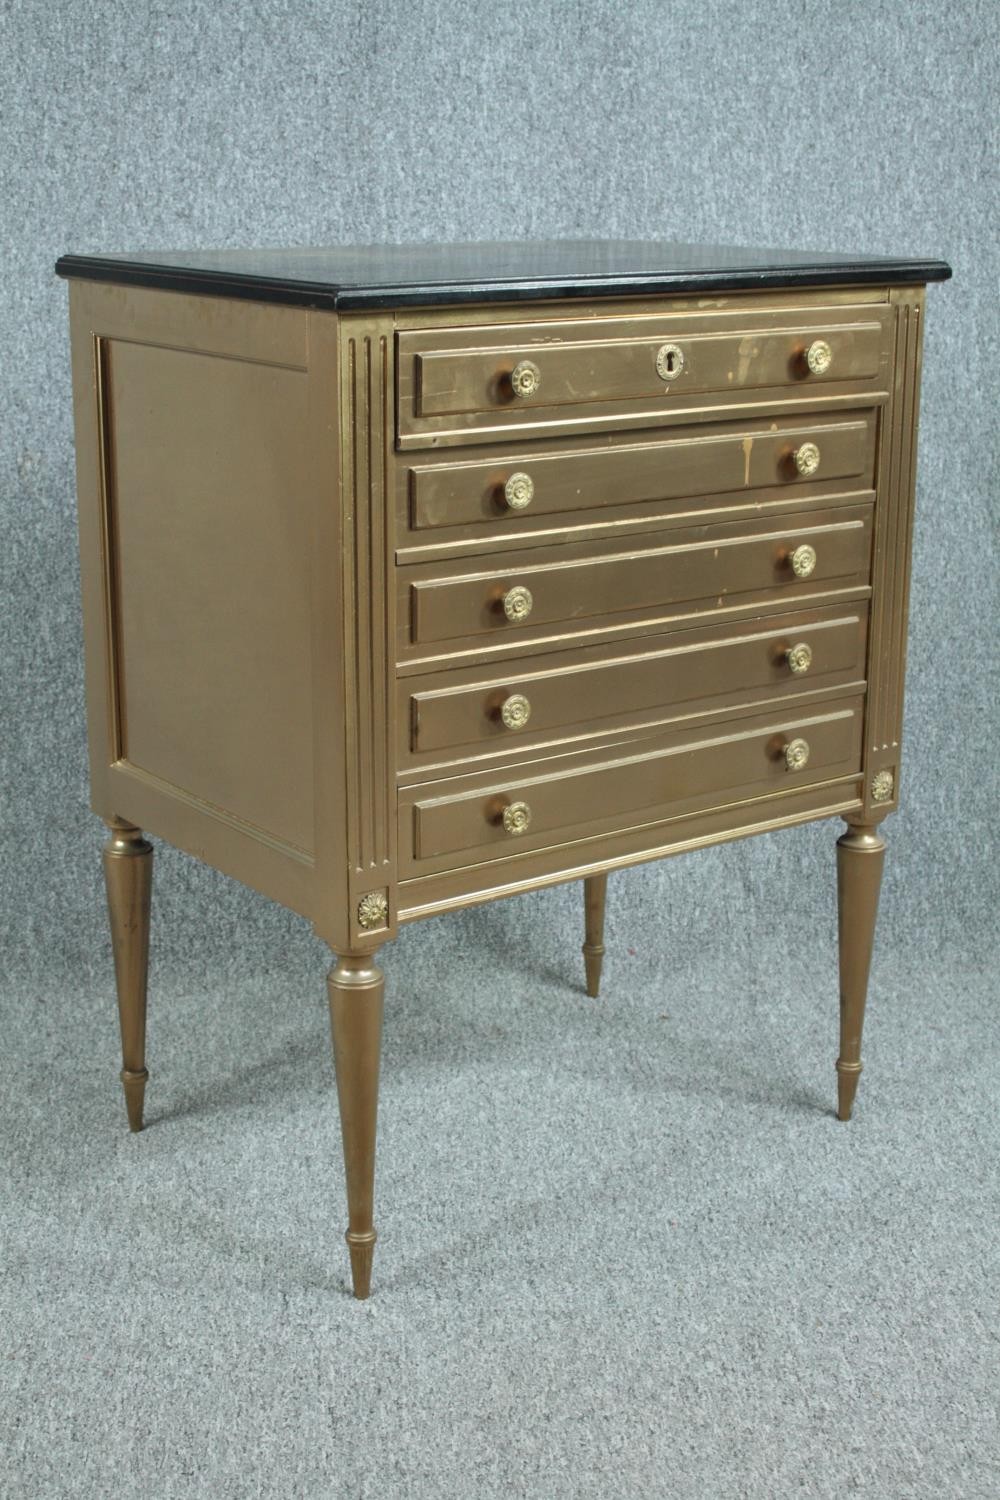 Chest of drawers, Louis XVI style, gold lacquered. H.81 W.62 D.45cm. - Image 2 of 5